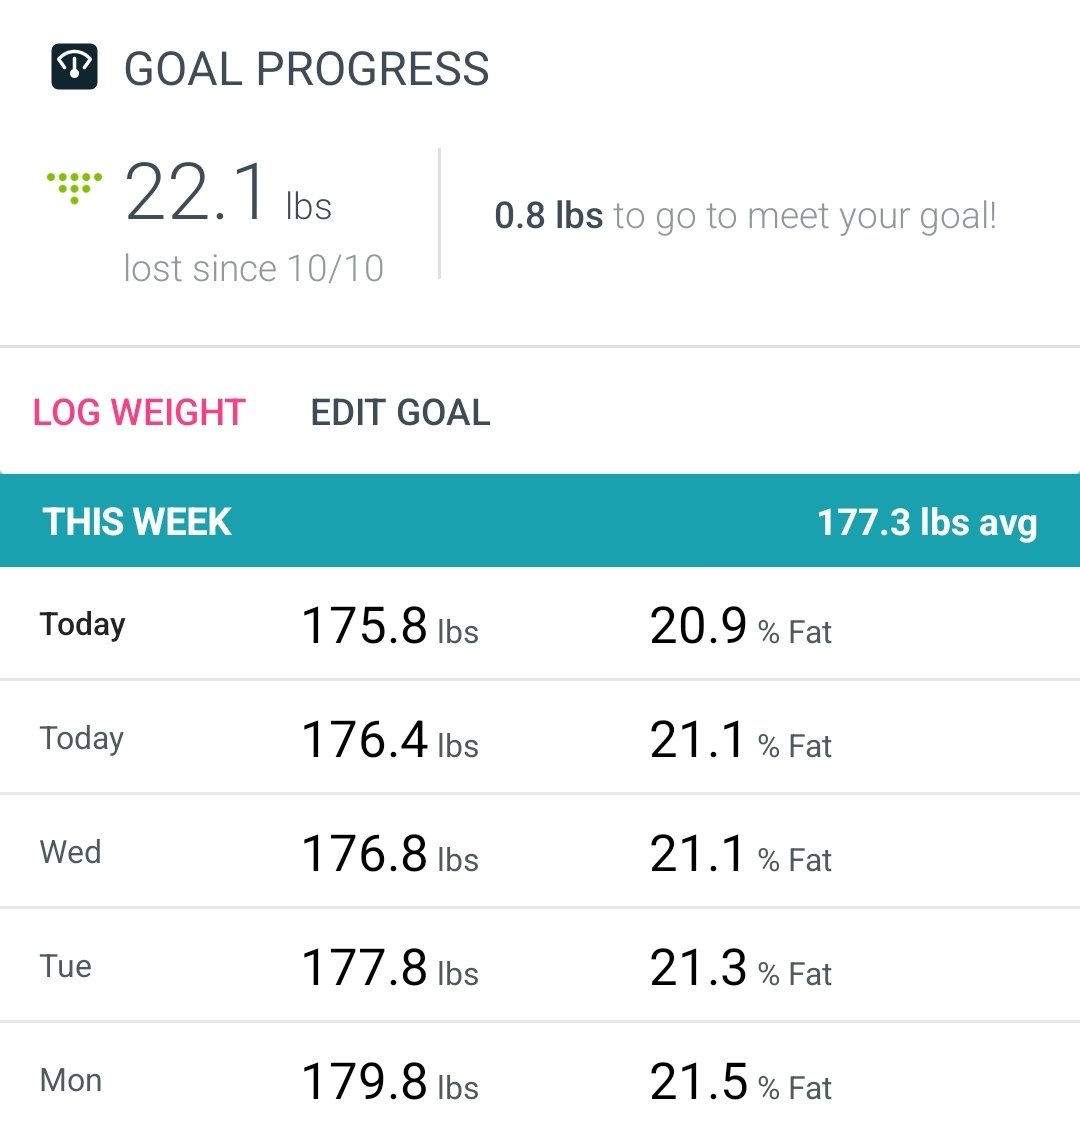 Weight gain is insidious when you're desk-bound for close to 16 hours a day. I was able to lose a lot by restricting calories to around 1200 a day and walking briskly a few days a week. I ate most of my calories within a 4-hour window which means I'm fasting for most of the day.